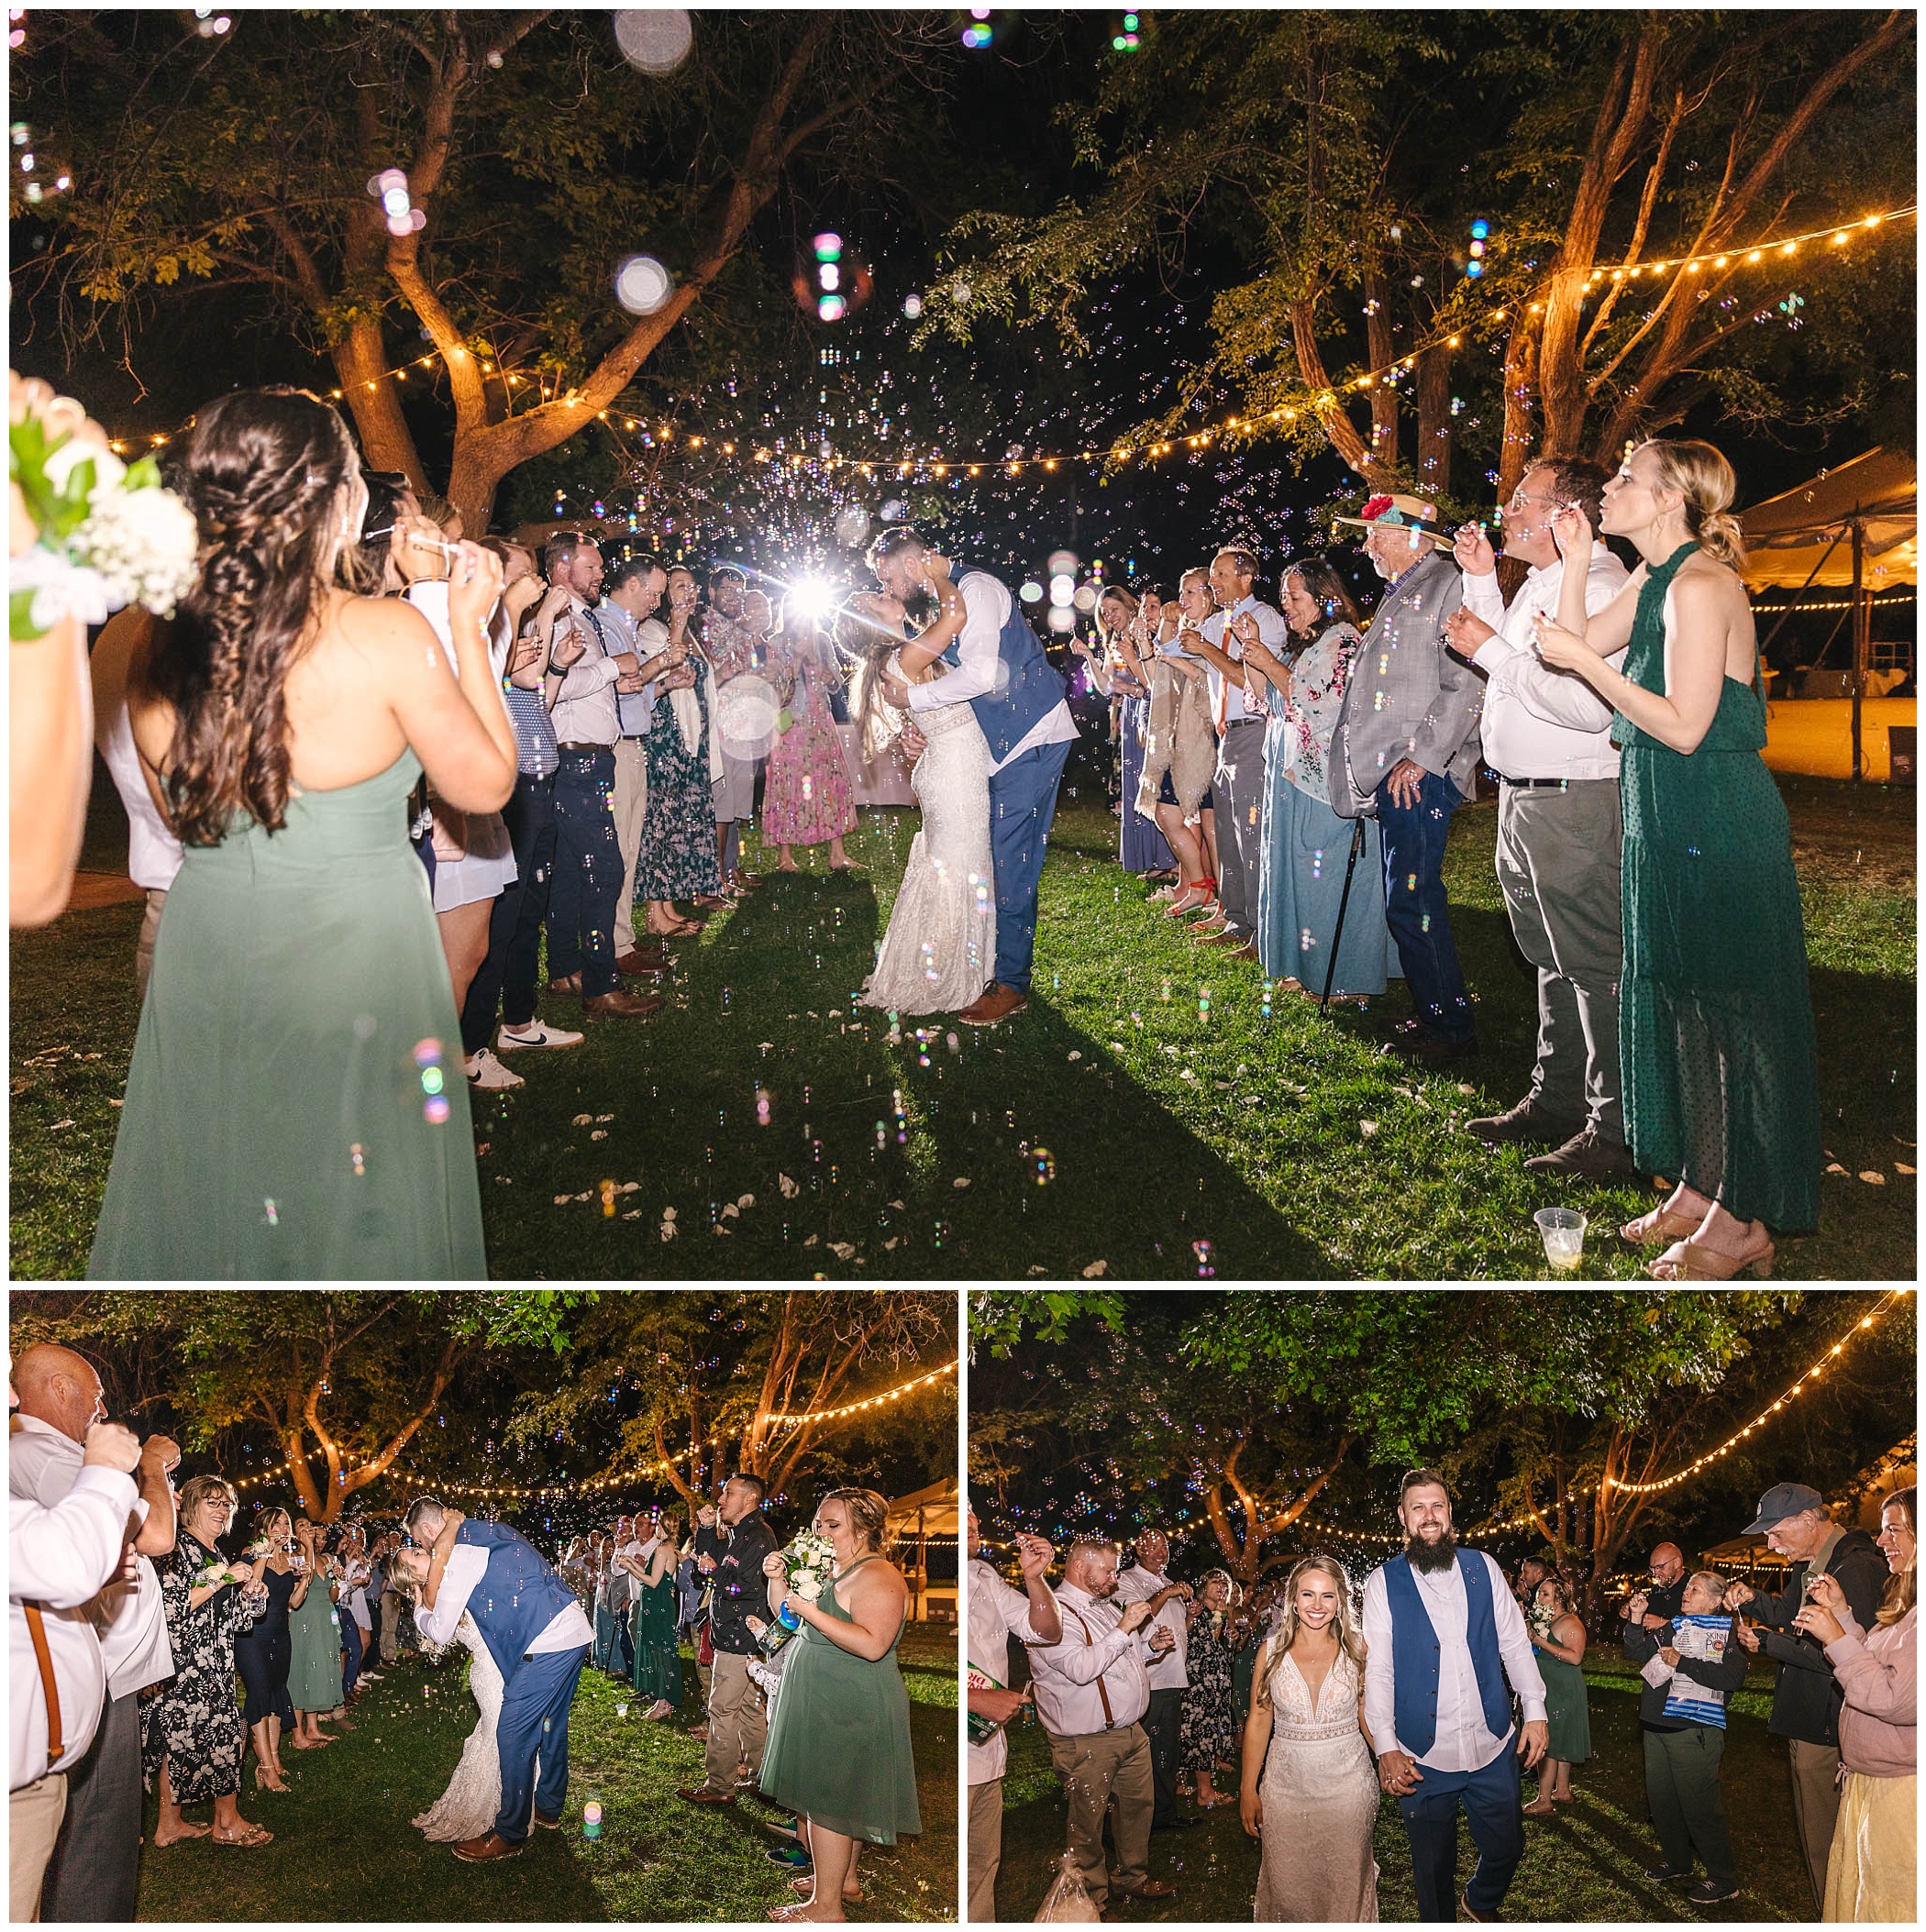 nighttime bubble sendoff for the bride and groom